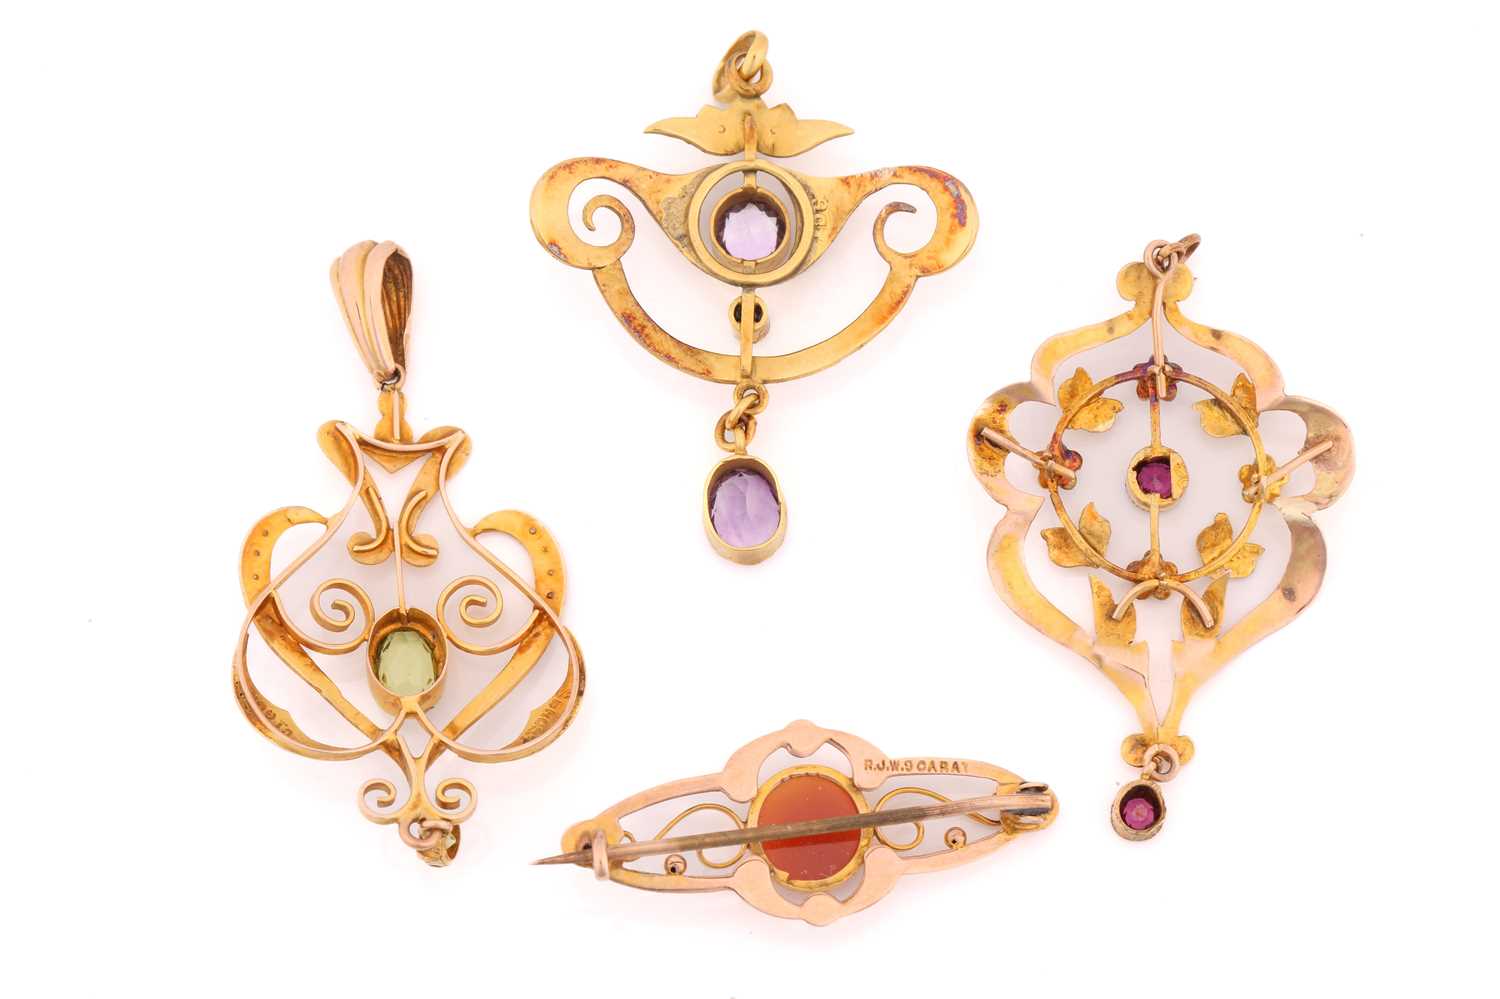 Three gem-set pendants and a cameo bar brooch; including an Edwardian scrolled pendant with floral - Image 2 of 2